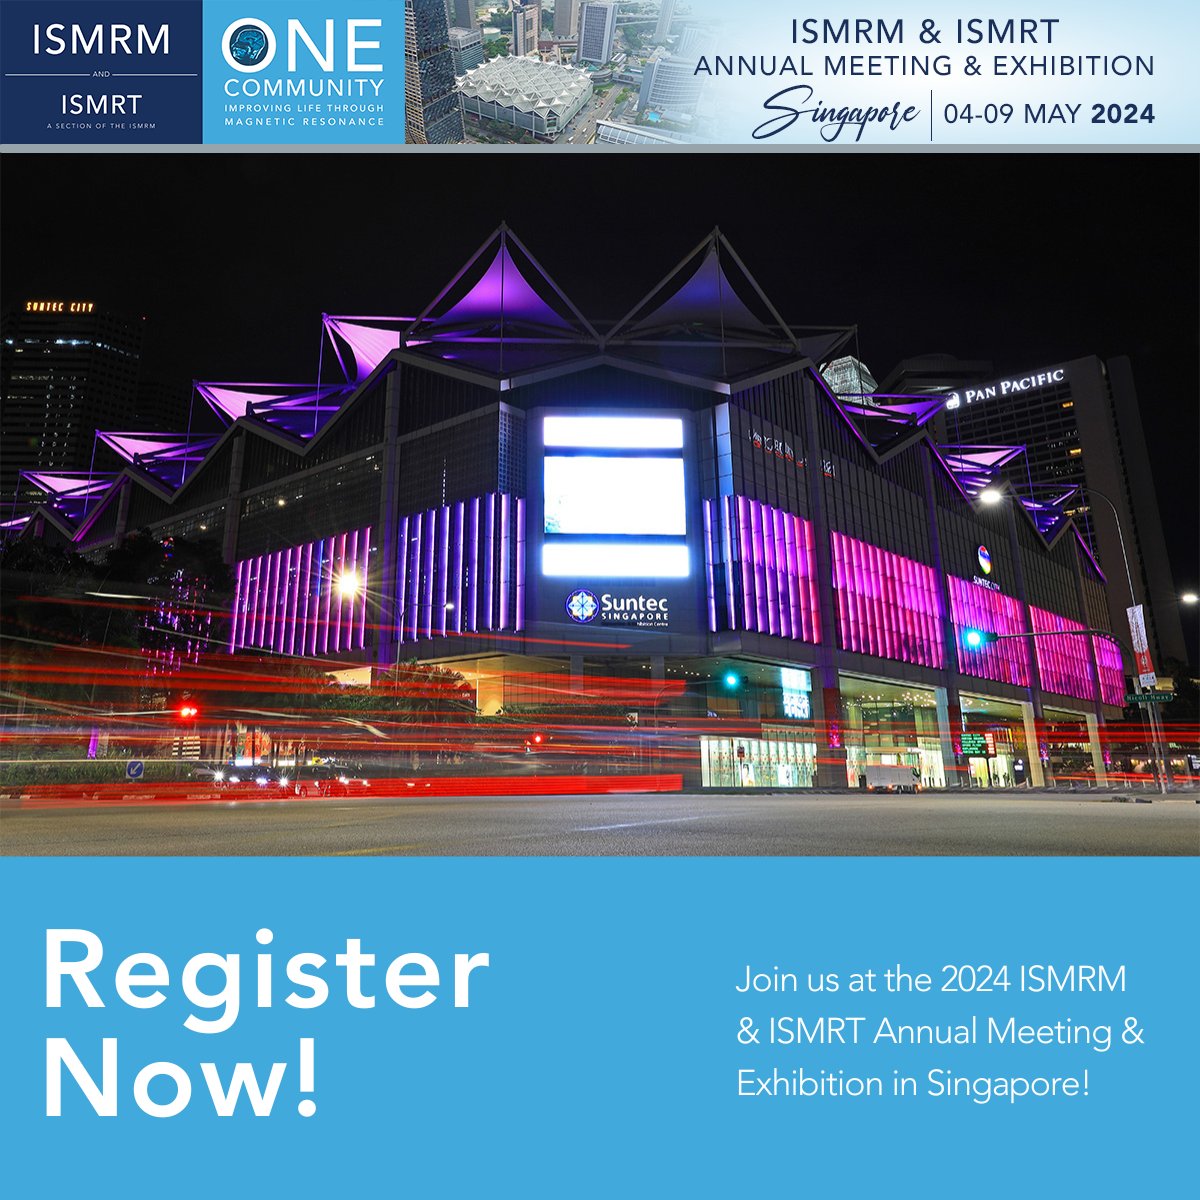 We can't wait to see you in Singapore — REGISTER NOW for the ISMRM & ISMRT Annual Meeting & Exhibition! bit.ly/3ML188V Secure your housing and book your hotel room on the official housing site: bit.ly/3GJE5be #ISMRM #ISMRT #Singapore #MRI #MagneticResonance